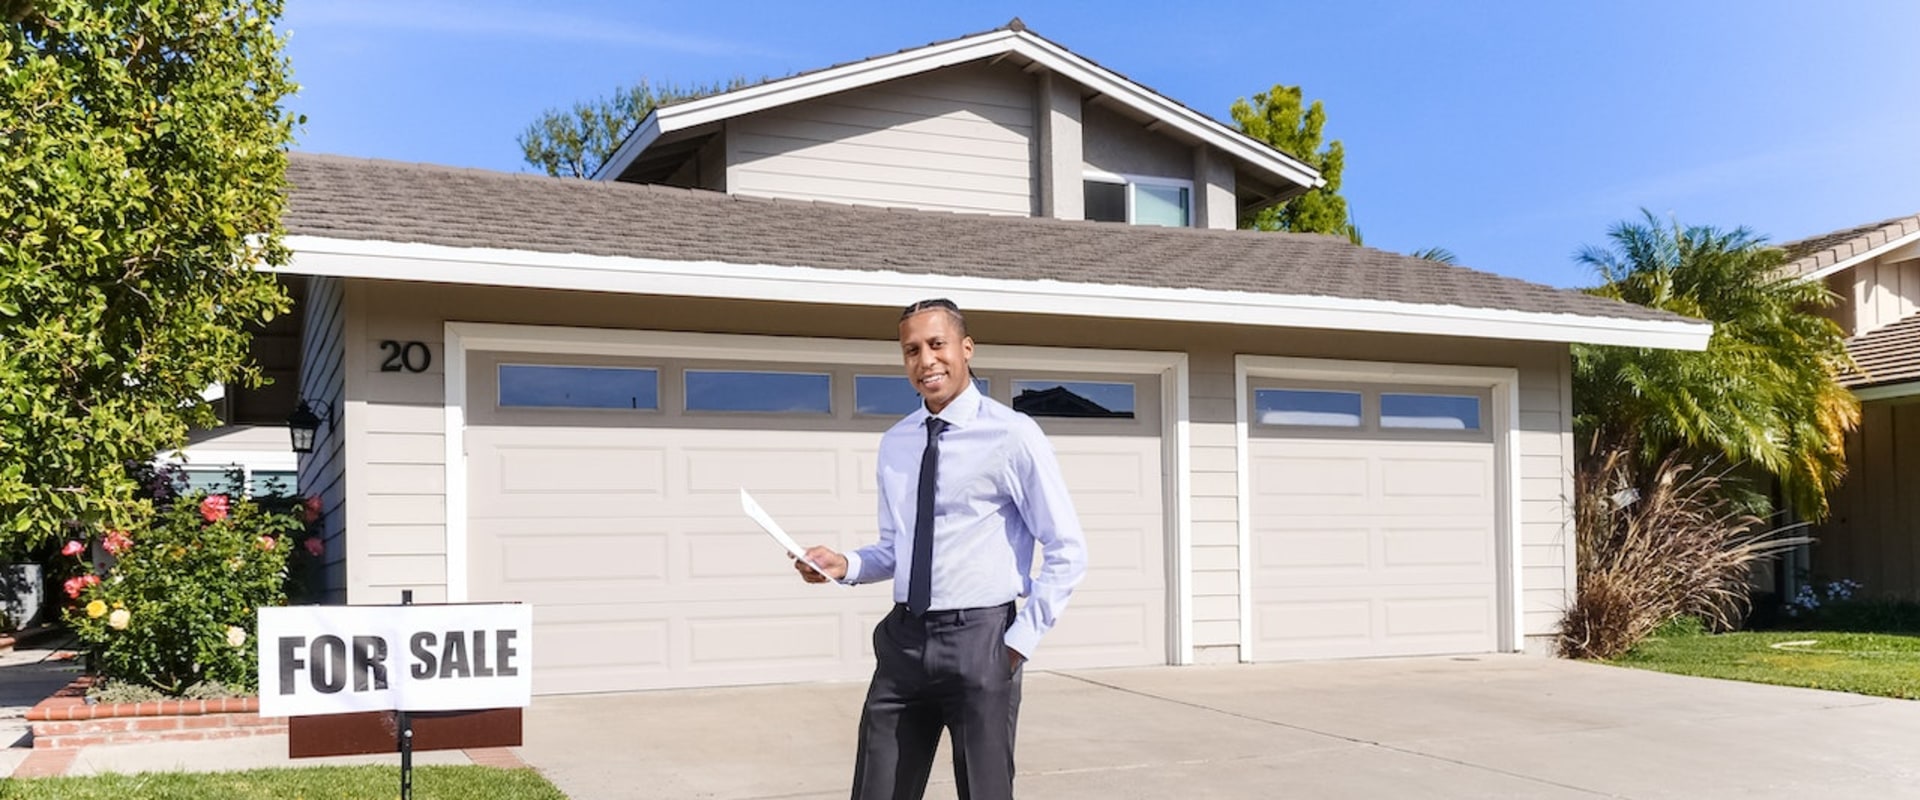 Purchasing A Property: Why Hiring A Realtor And Conducting Home Inspections Is Necessary?